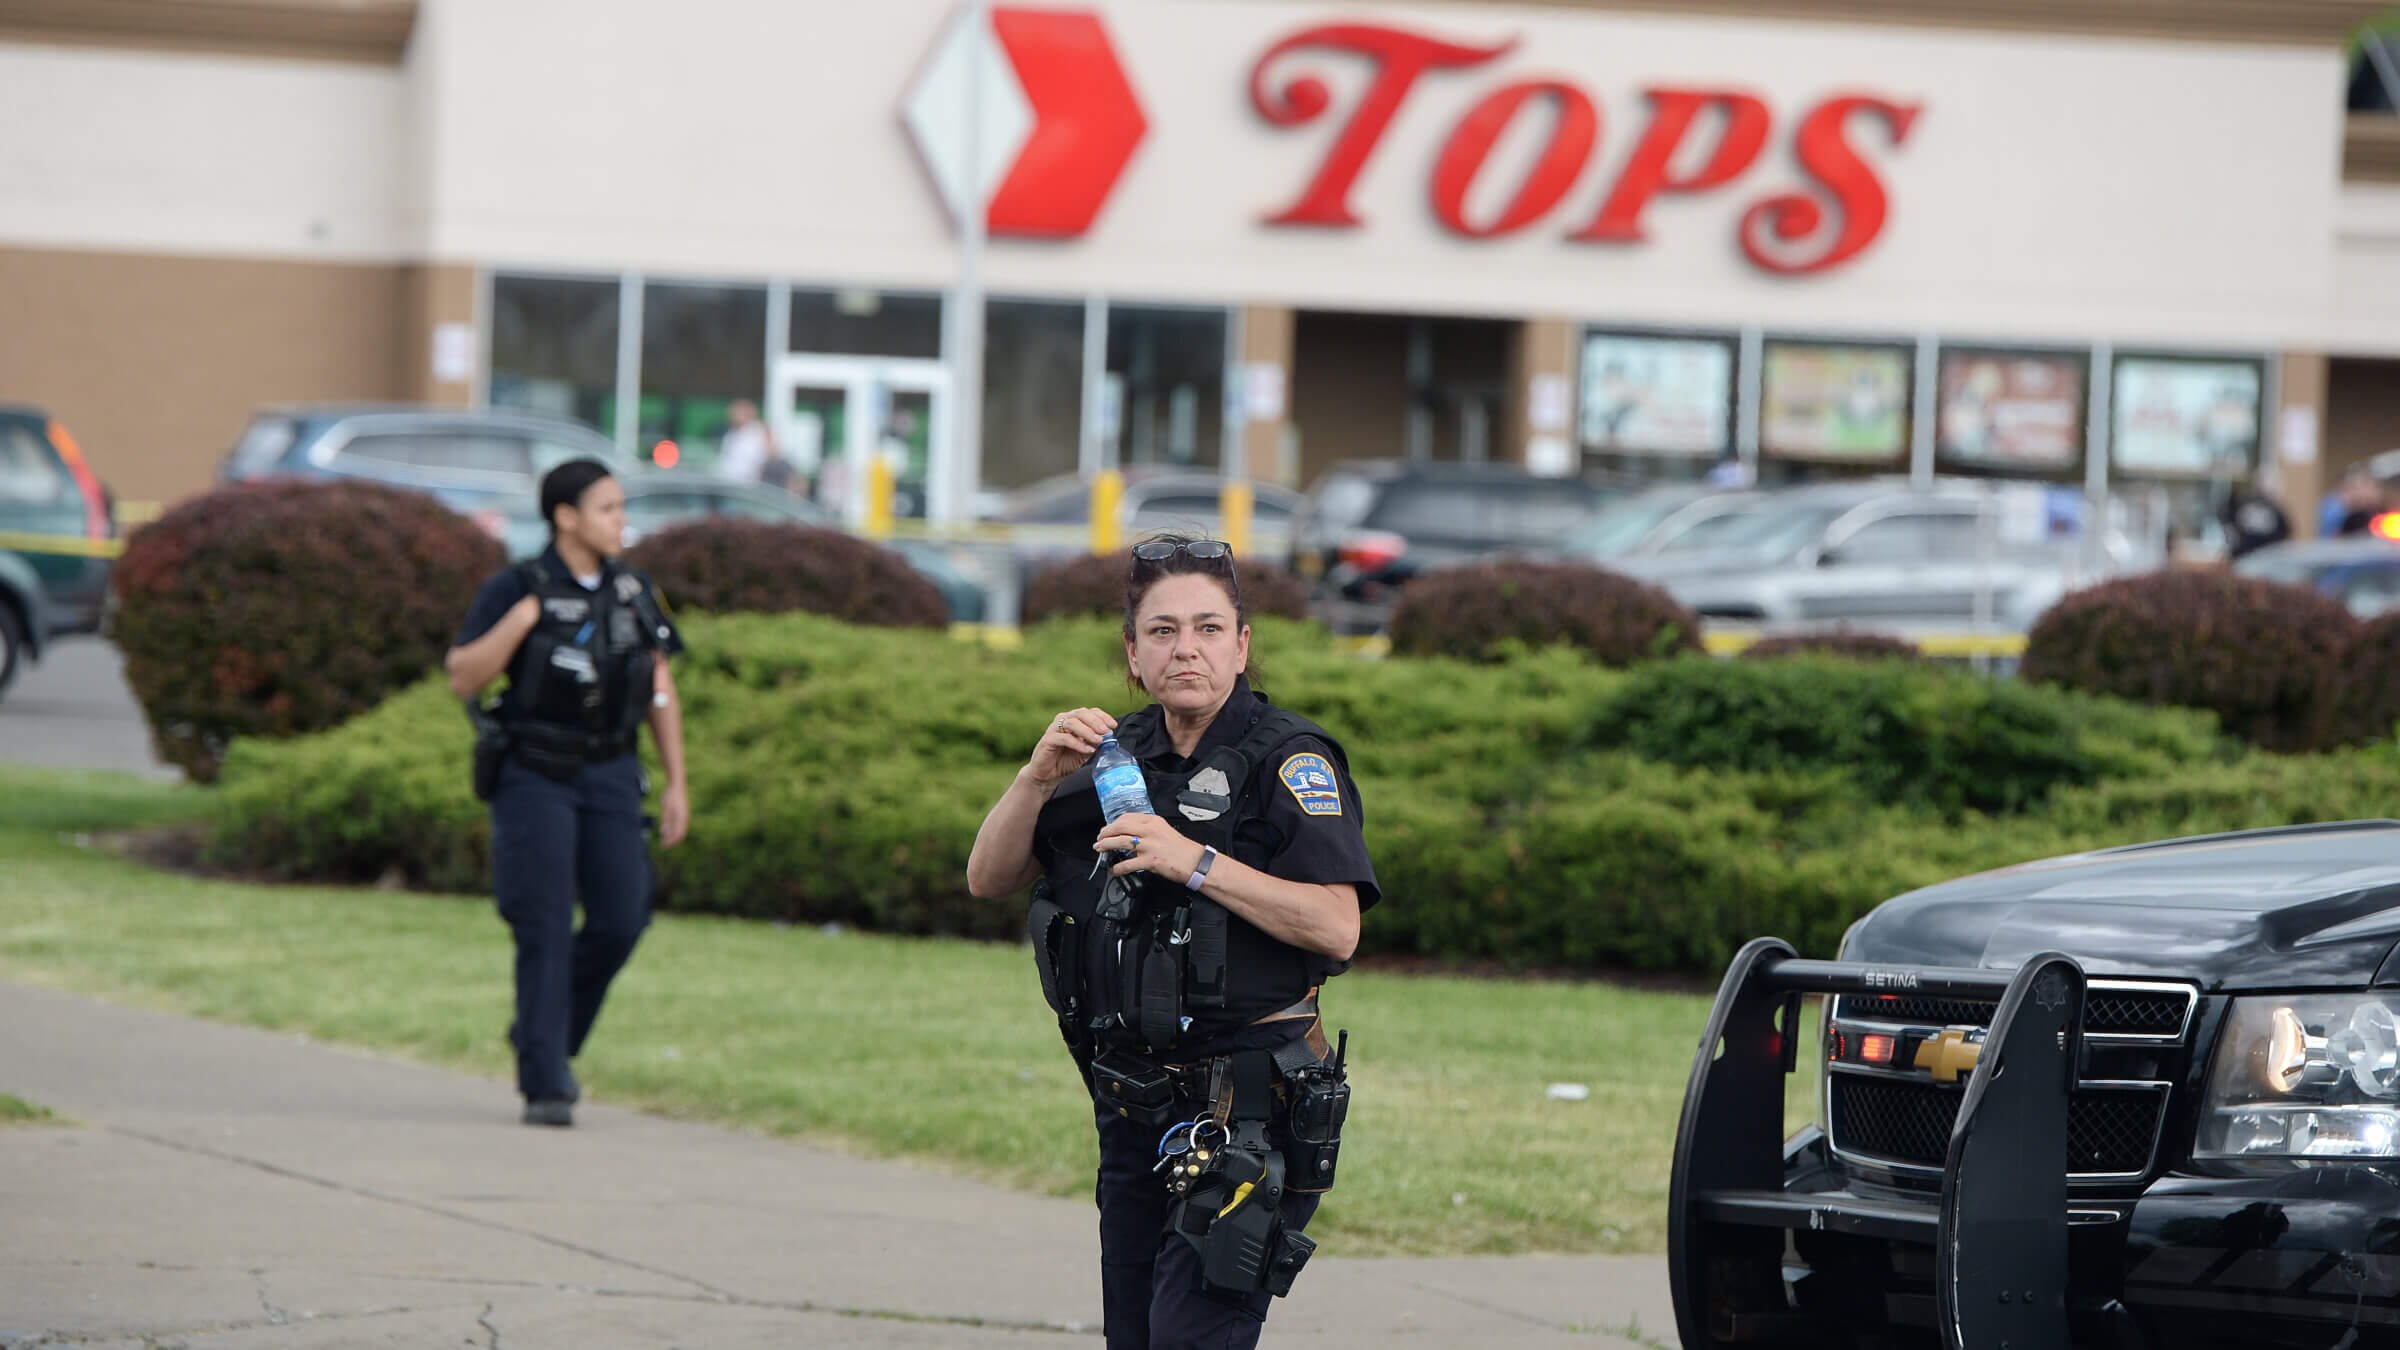 Buffalo Police at the Tops Friendly Market where at least 10 people were killed after a mass shooting by a murderer inspired by racist and antisemitic philosophies.